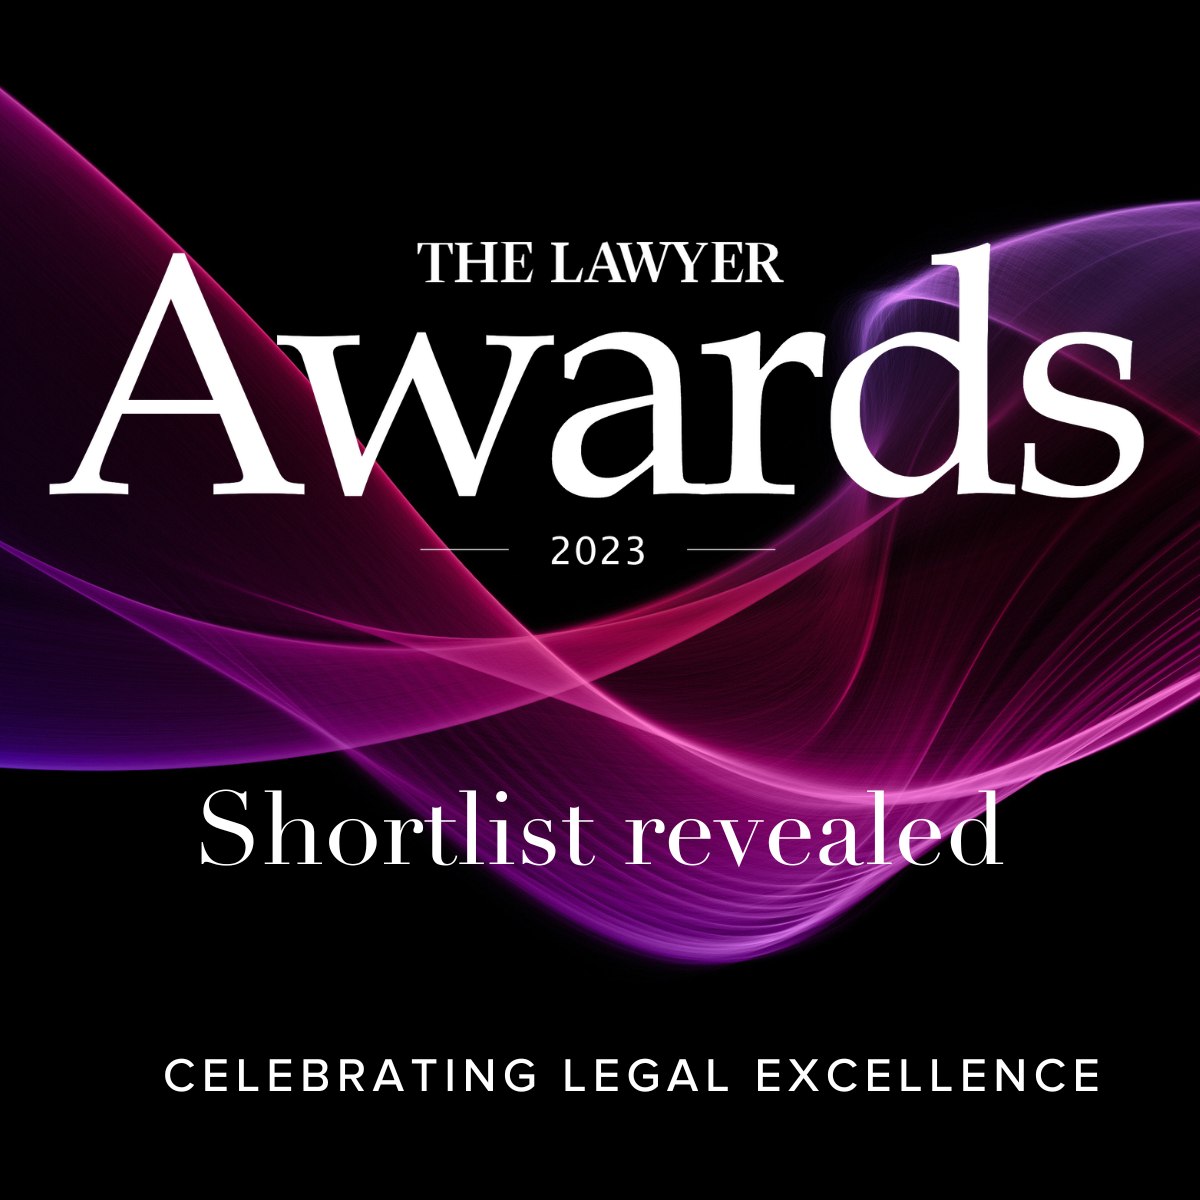 We are delighted to announce that we have been shortlisted for independent law firm of the year at the Lawyer Awards 2023.

The winners will be announced on 20 June, good luck to all the other finalists.

#thelawyerawards